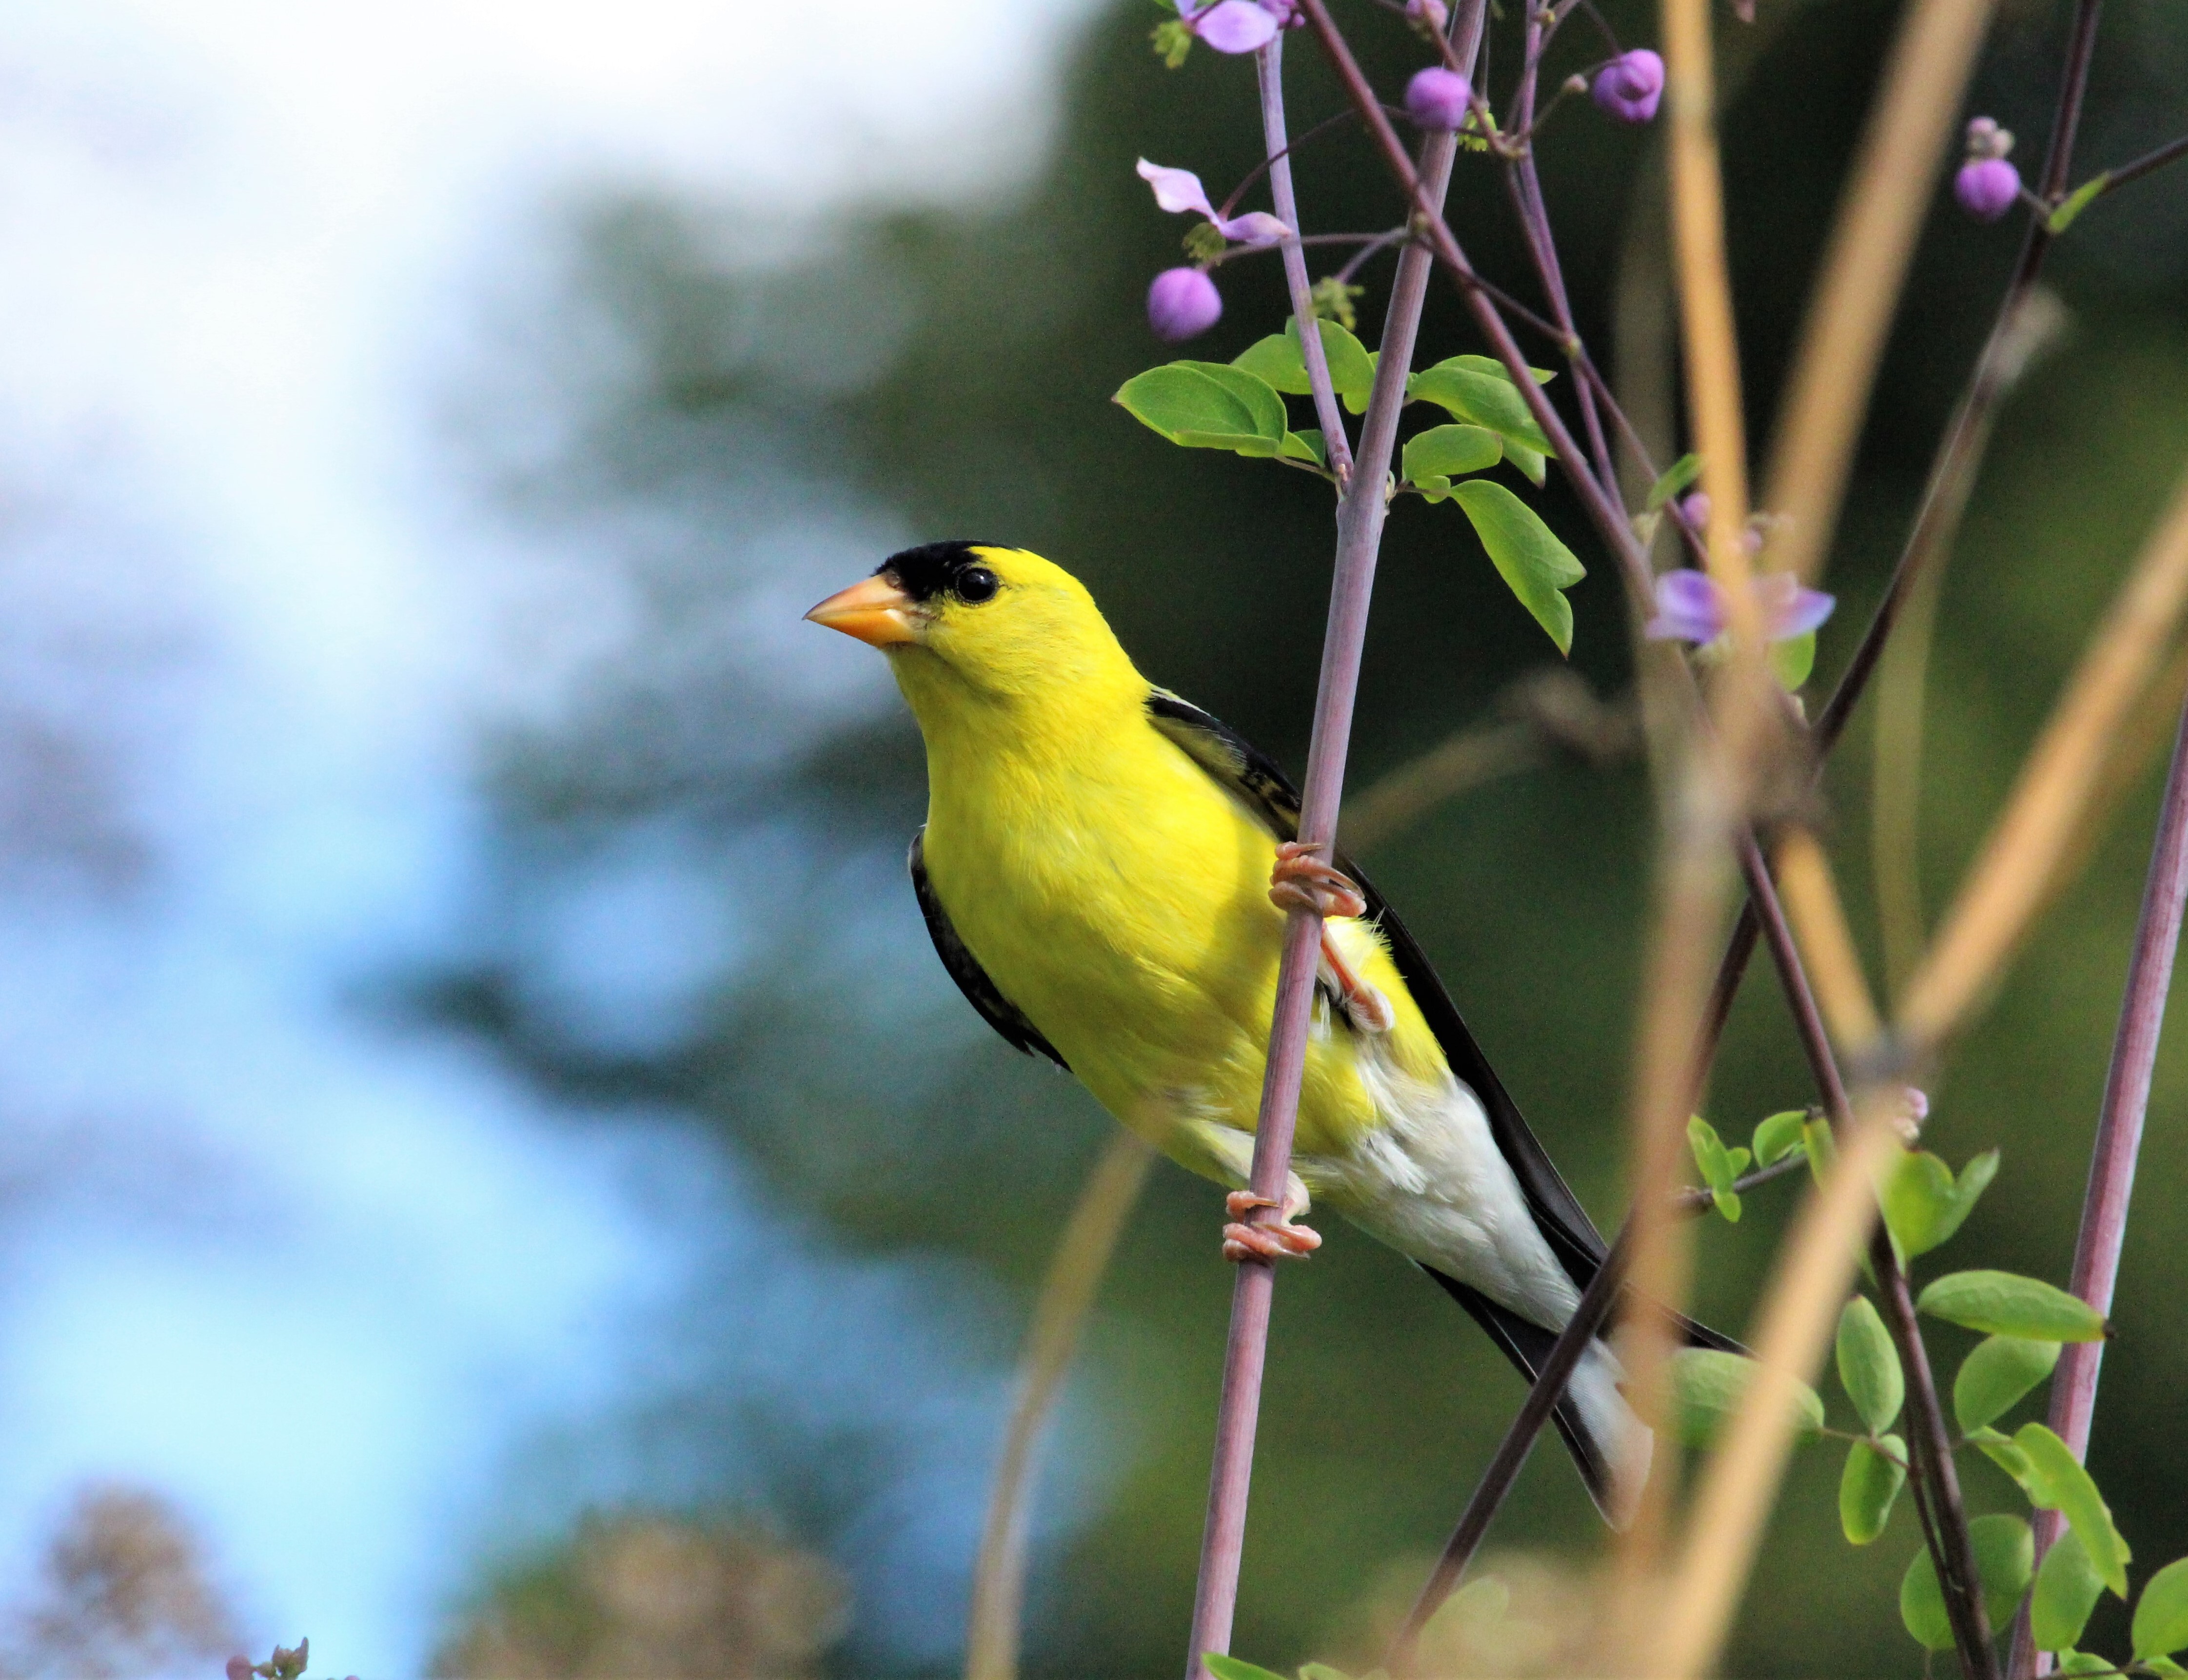 American Goldfinches are found year-round in the Snug Harbor gardens. Photo: <a href="https://www.flickr.com/photos/89780664@N05/" target="_blank" >Dave Ostapiuk</a>